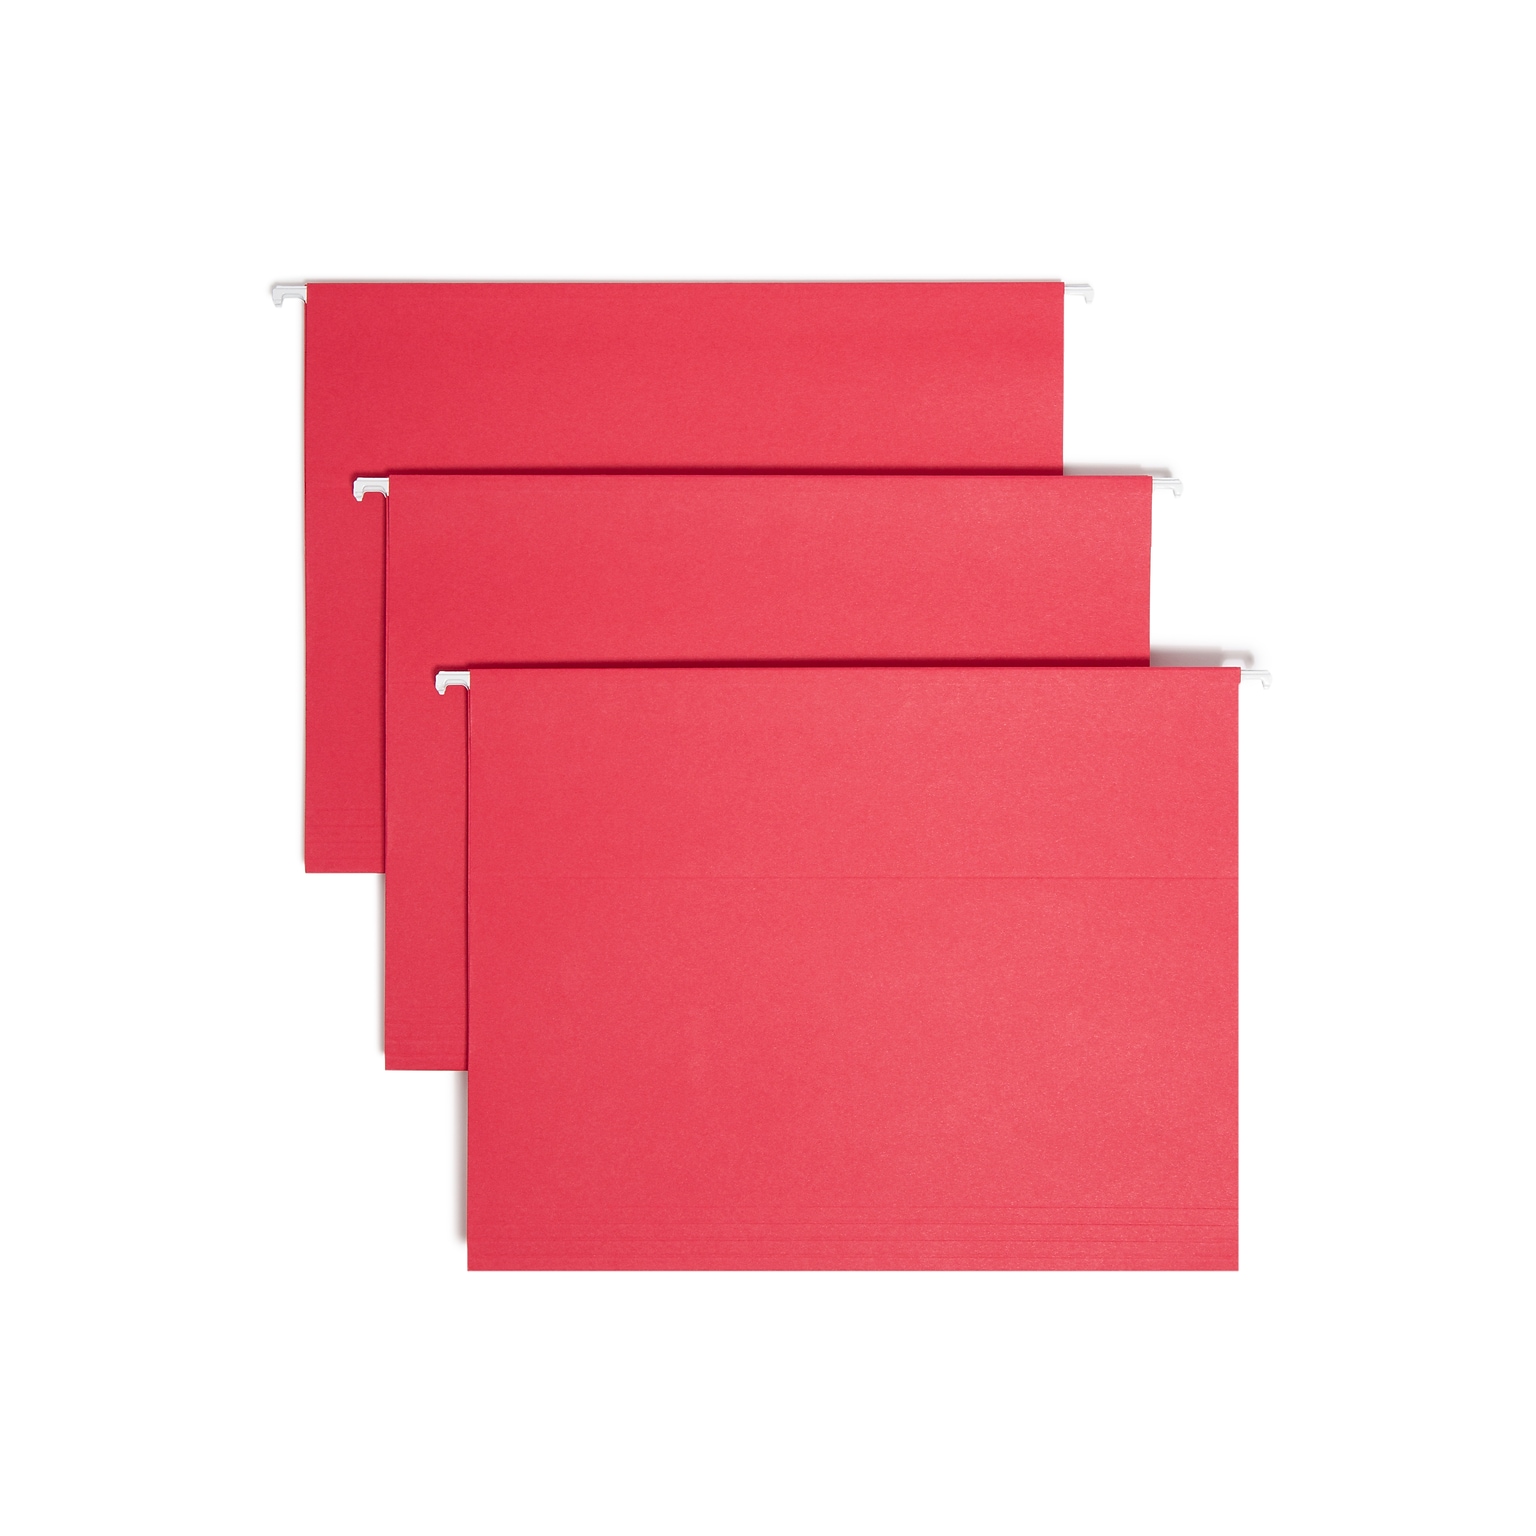 Smead Adjustable Tab Recycled Hanging File Folder, 3/4 Expansion, 5-Tab, Letter Size, Red, 25/Box (64067)